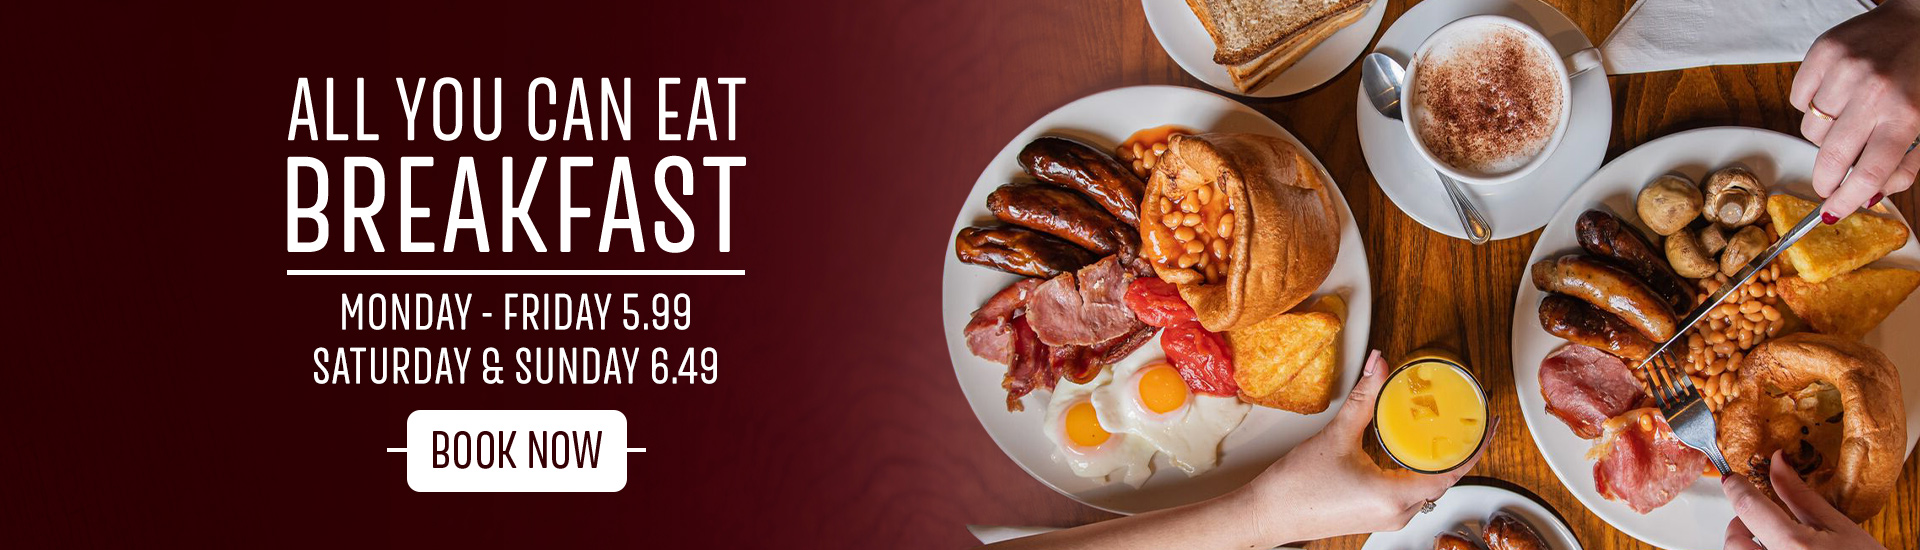 Breakfast at Toby Carvery Stoneycroft